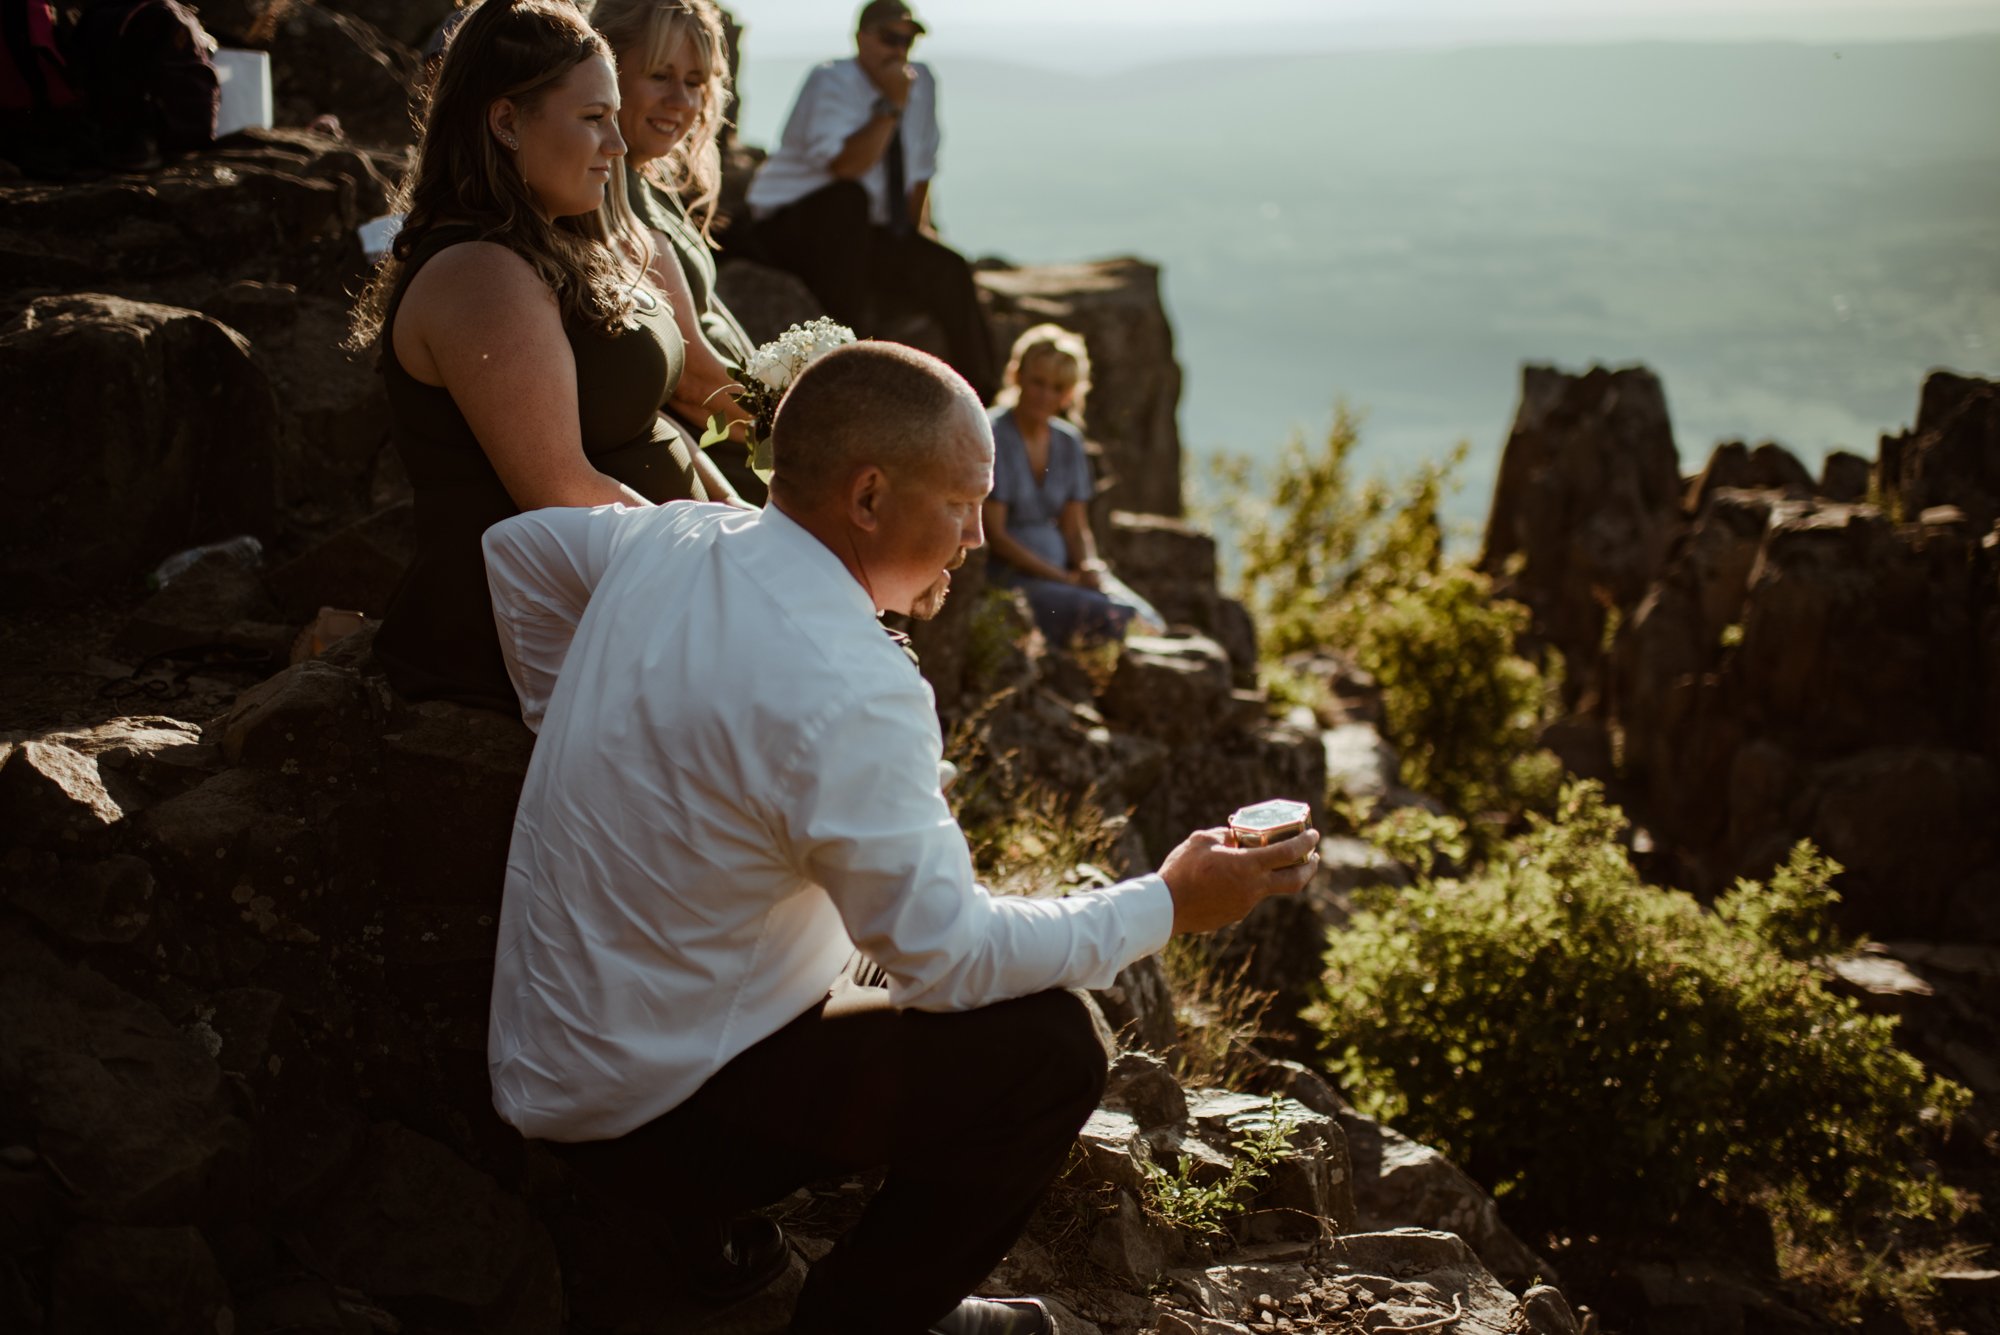 Sunset Elopement on Stony Man Summit in Shenandoah National Park - White Sails Creative Elopement Photography - July Elopement on the Blue Ridge Parkway_24.jpg